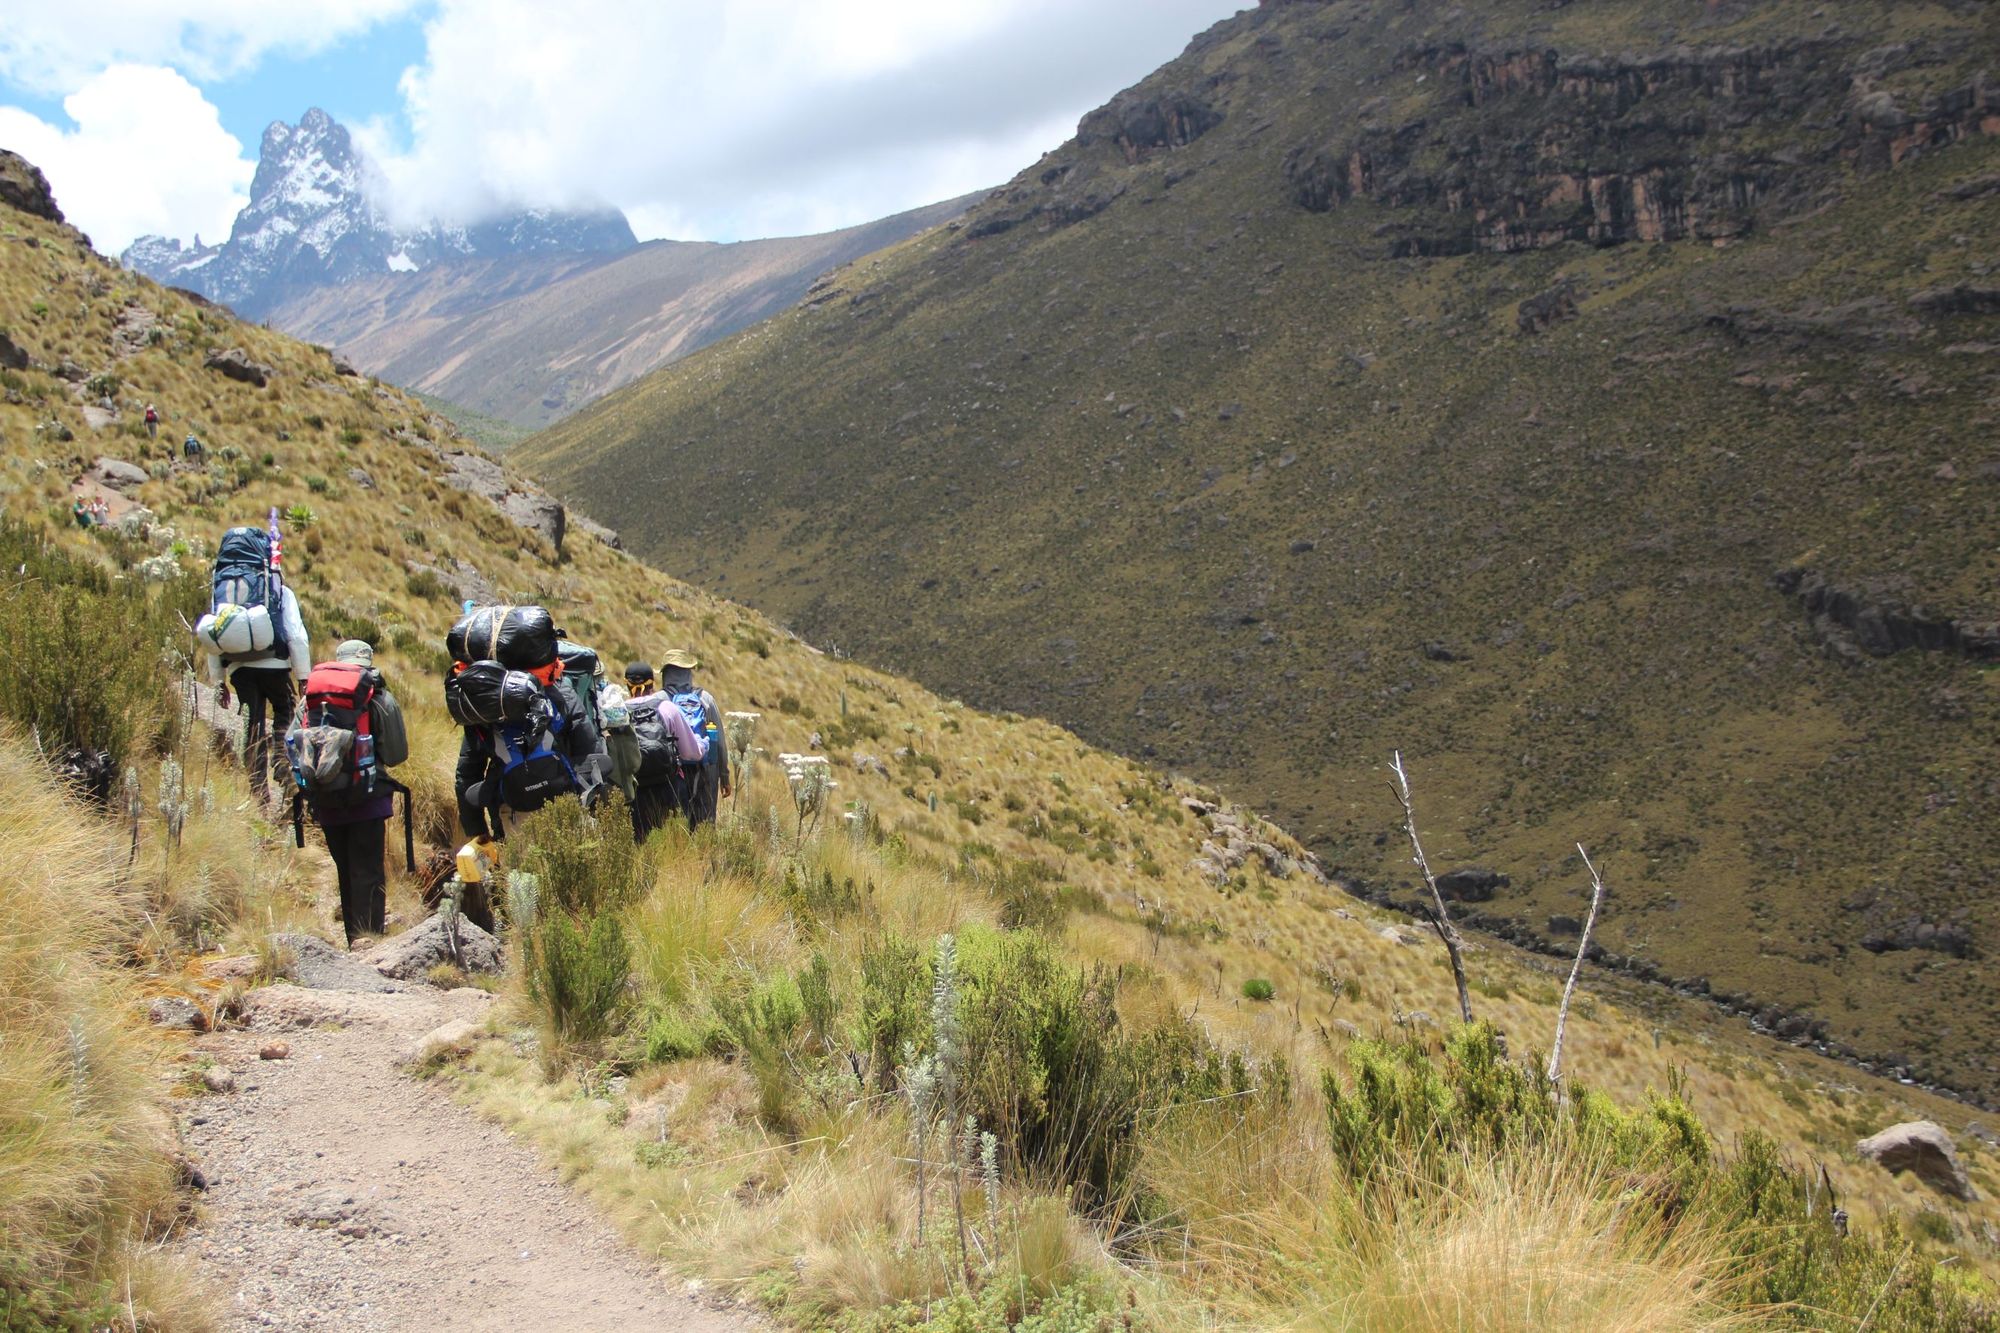 Acclimisation days are encouraged on the Mount Kenya hike, and add to the success rate of the climb. Photo: Getty